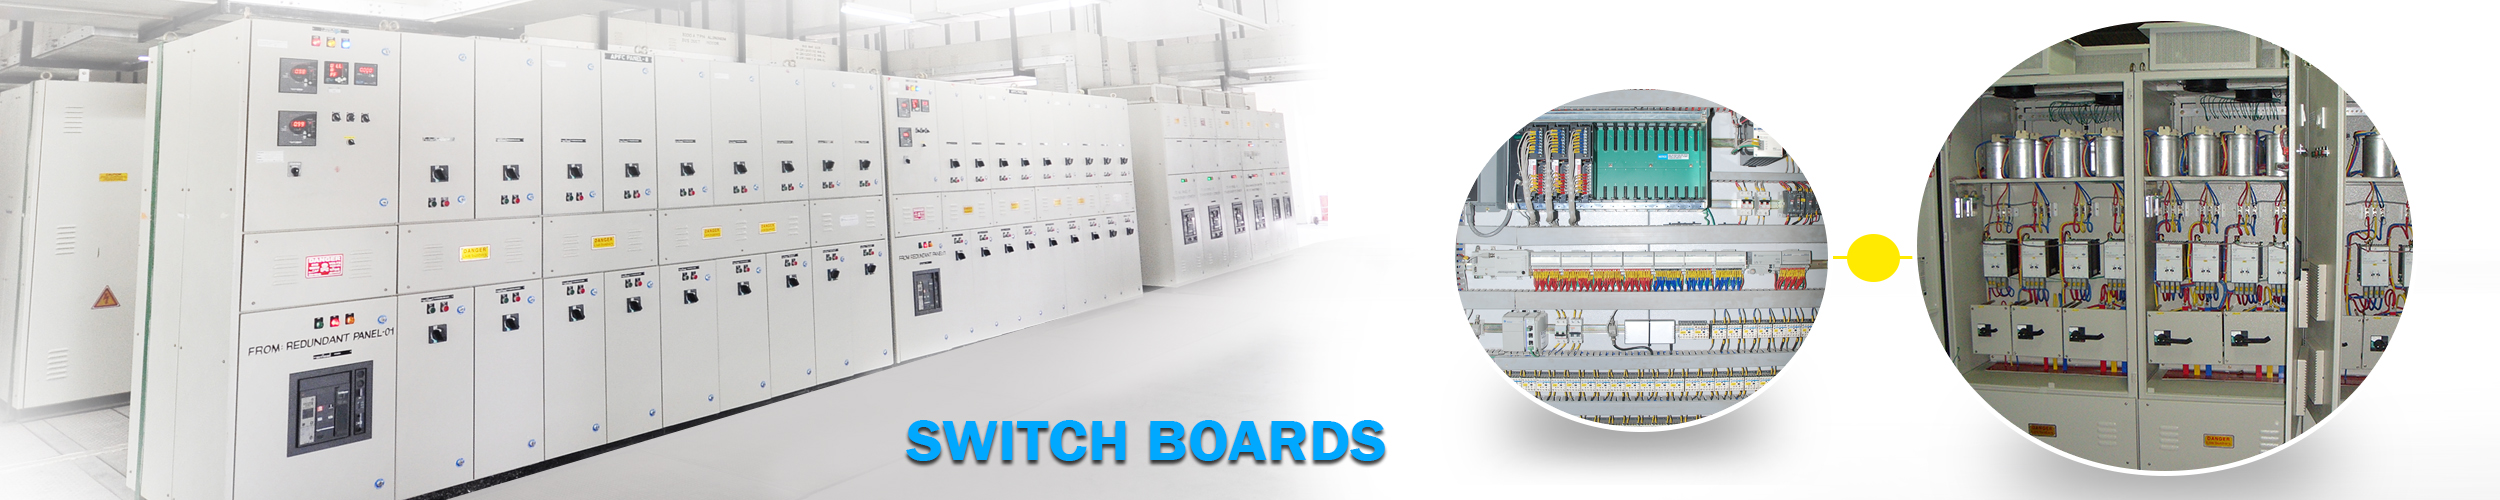 switch-boards